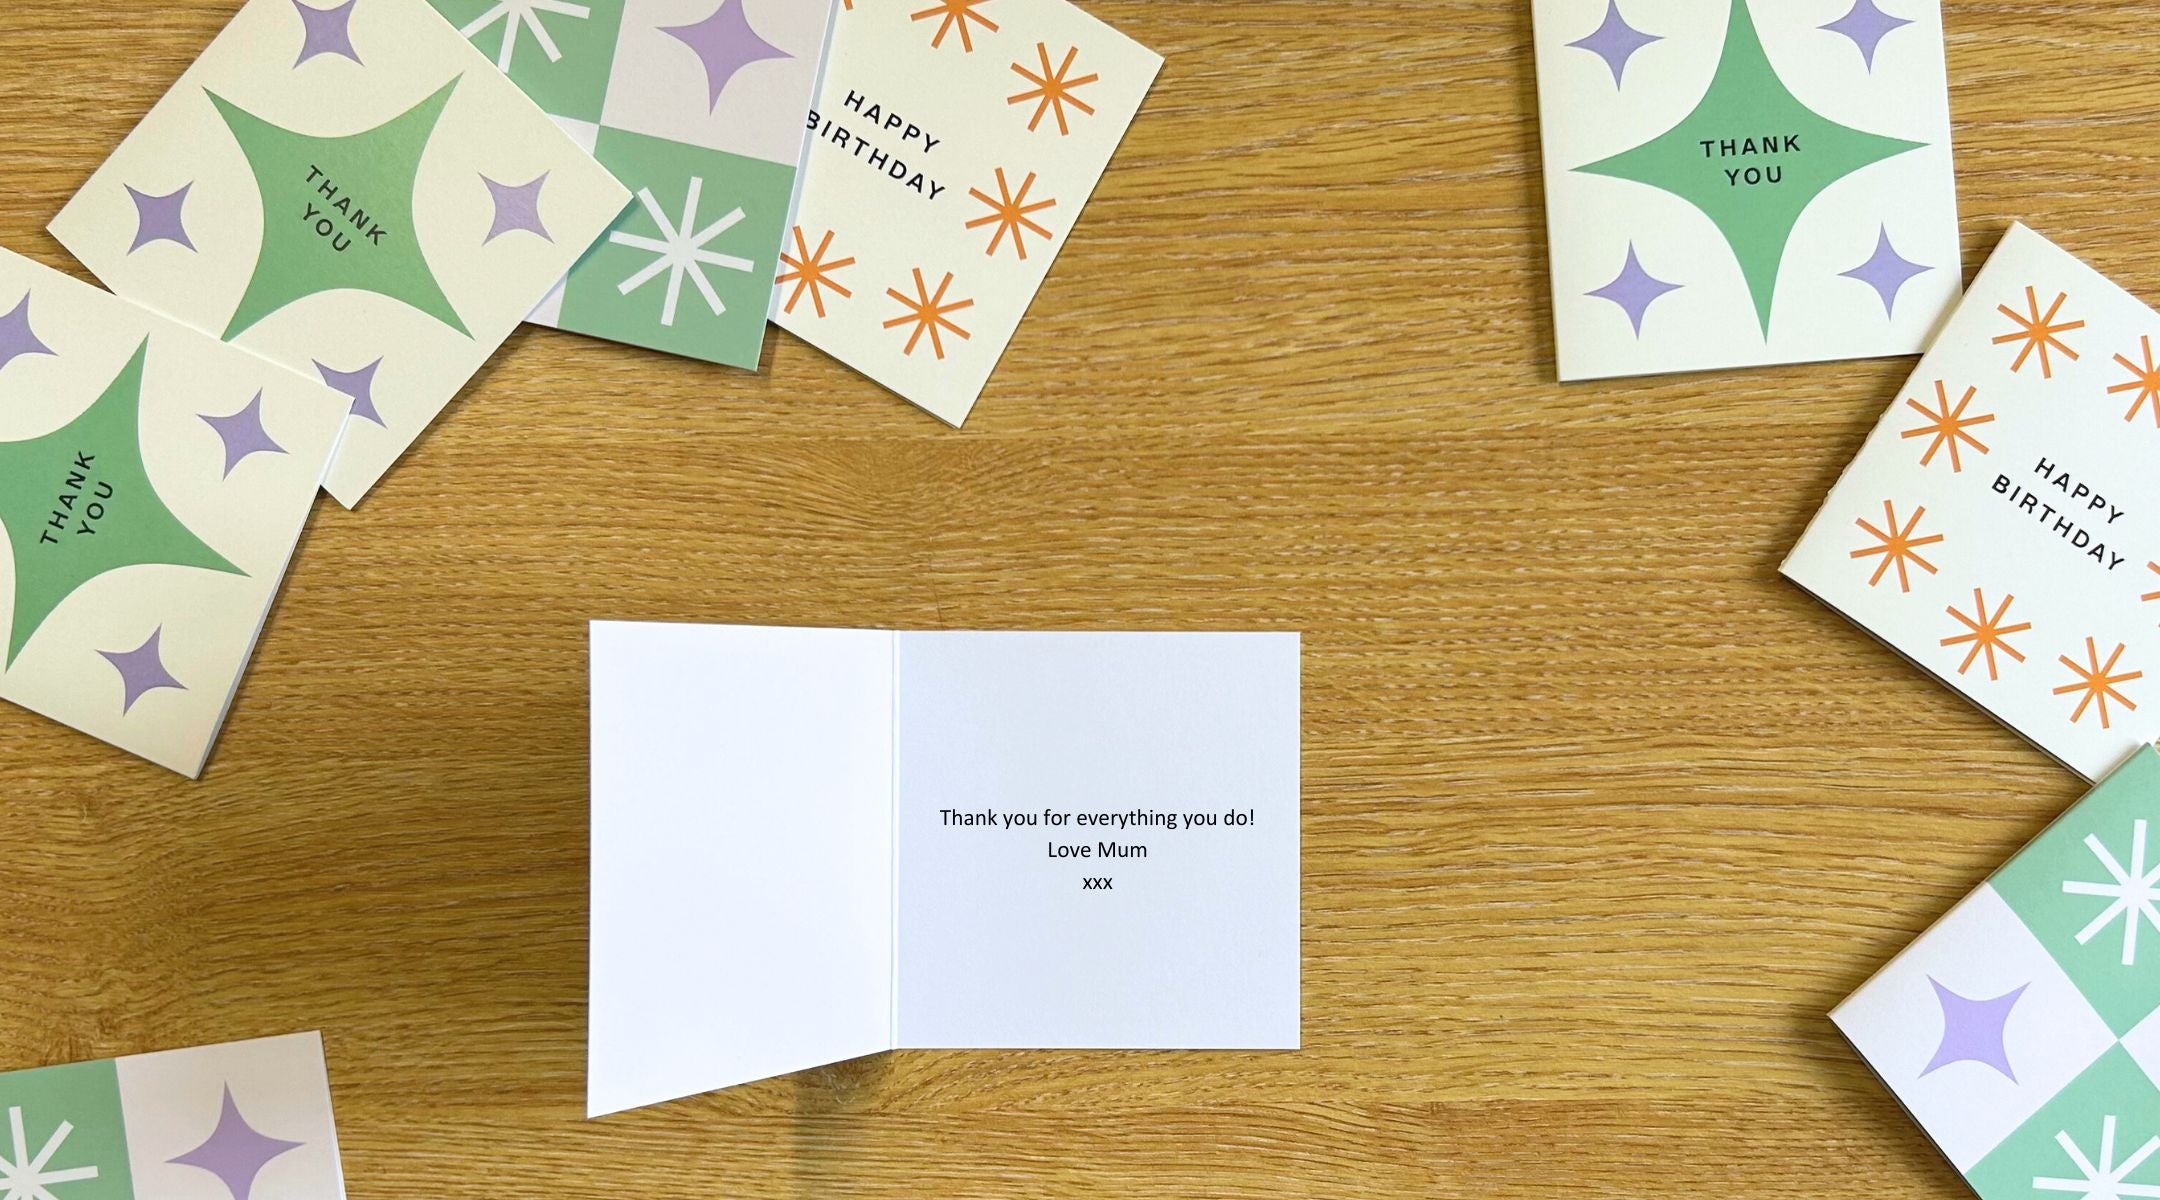 A selection of gift message cards by Harry Specters